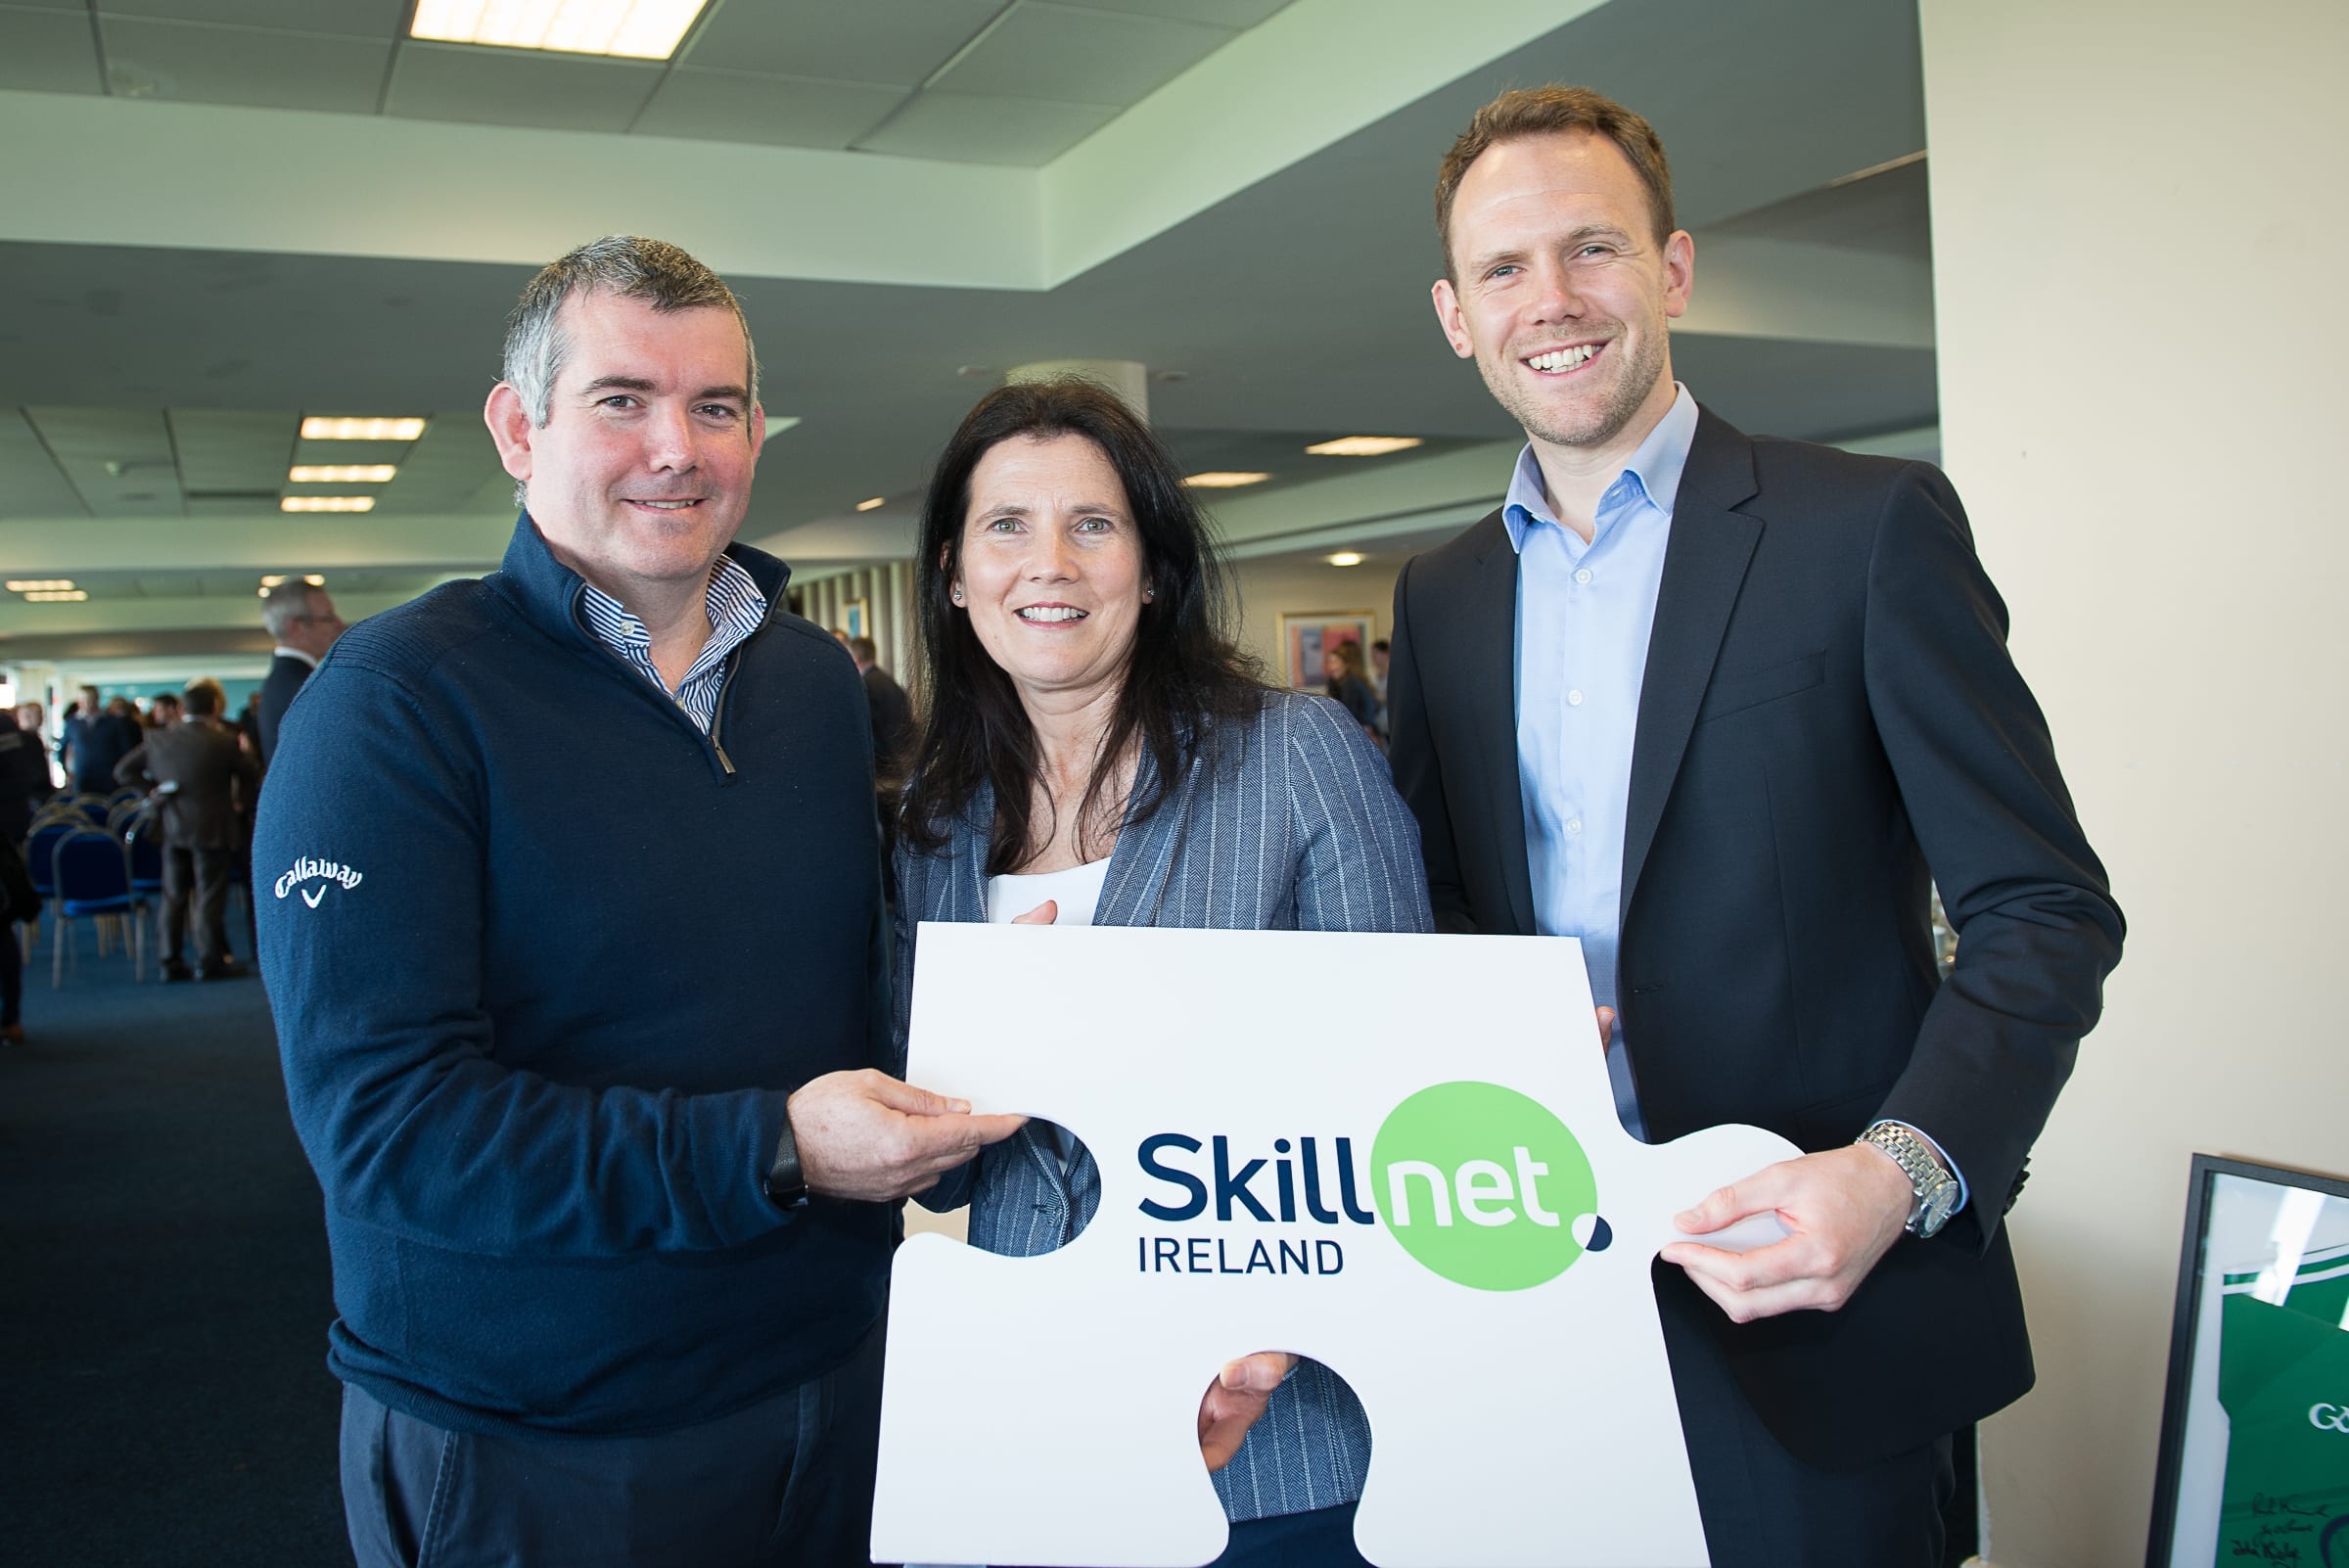 From Left to Right:  Upskilling the MidWest with John Kiely which took place on the 30th April in function room of the Limerick Racecourse: Mark O’Connor - 4Site, Anne Morris - Limerick Chamber Skillnet, Niall Looney - 4Site